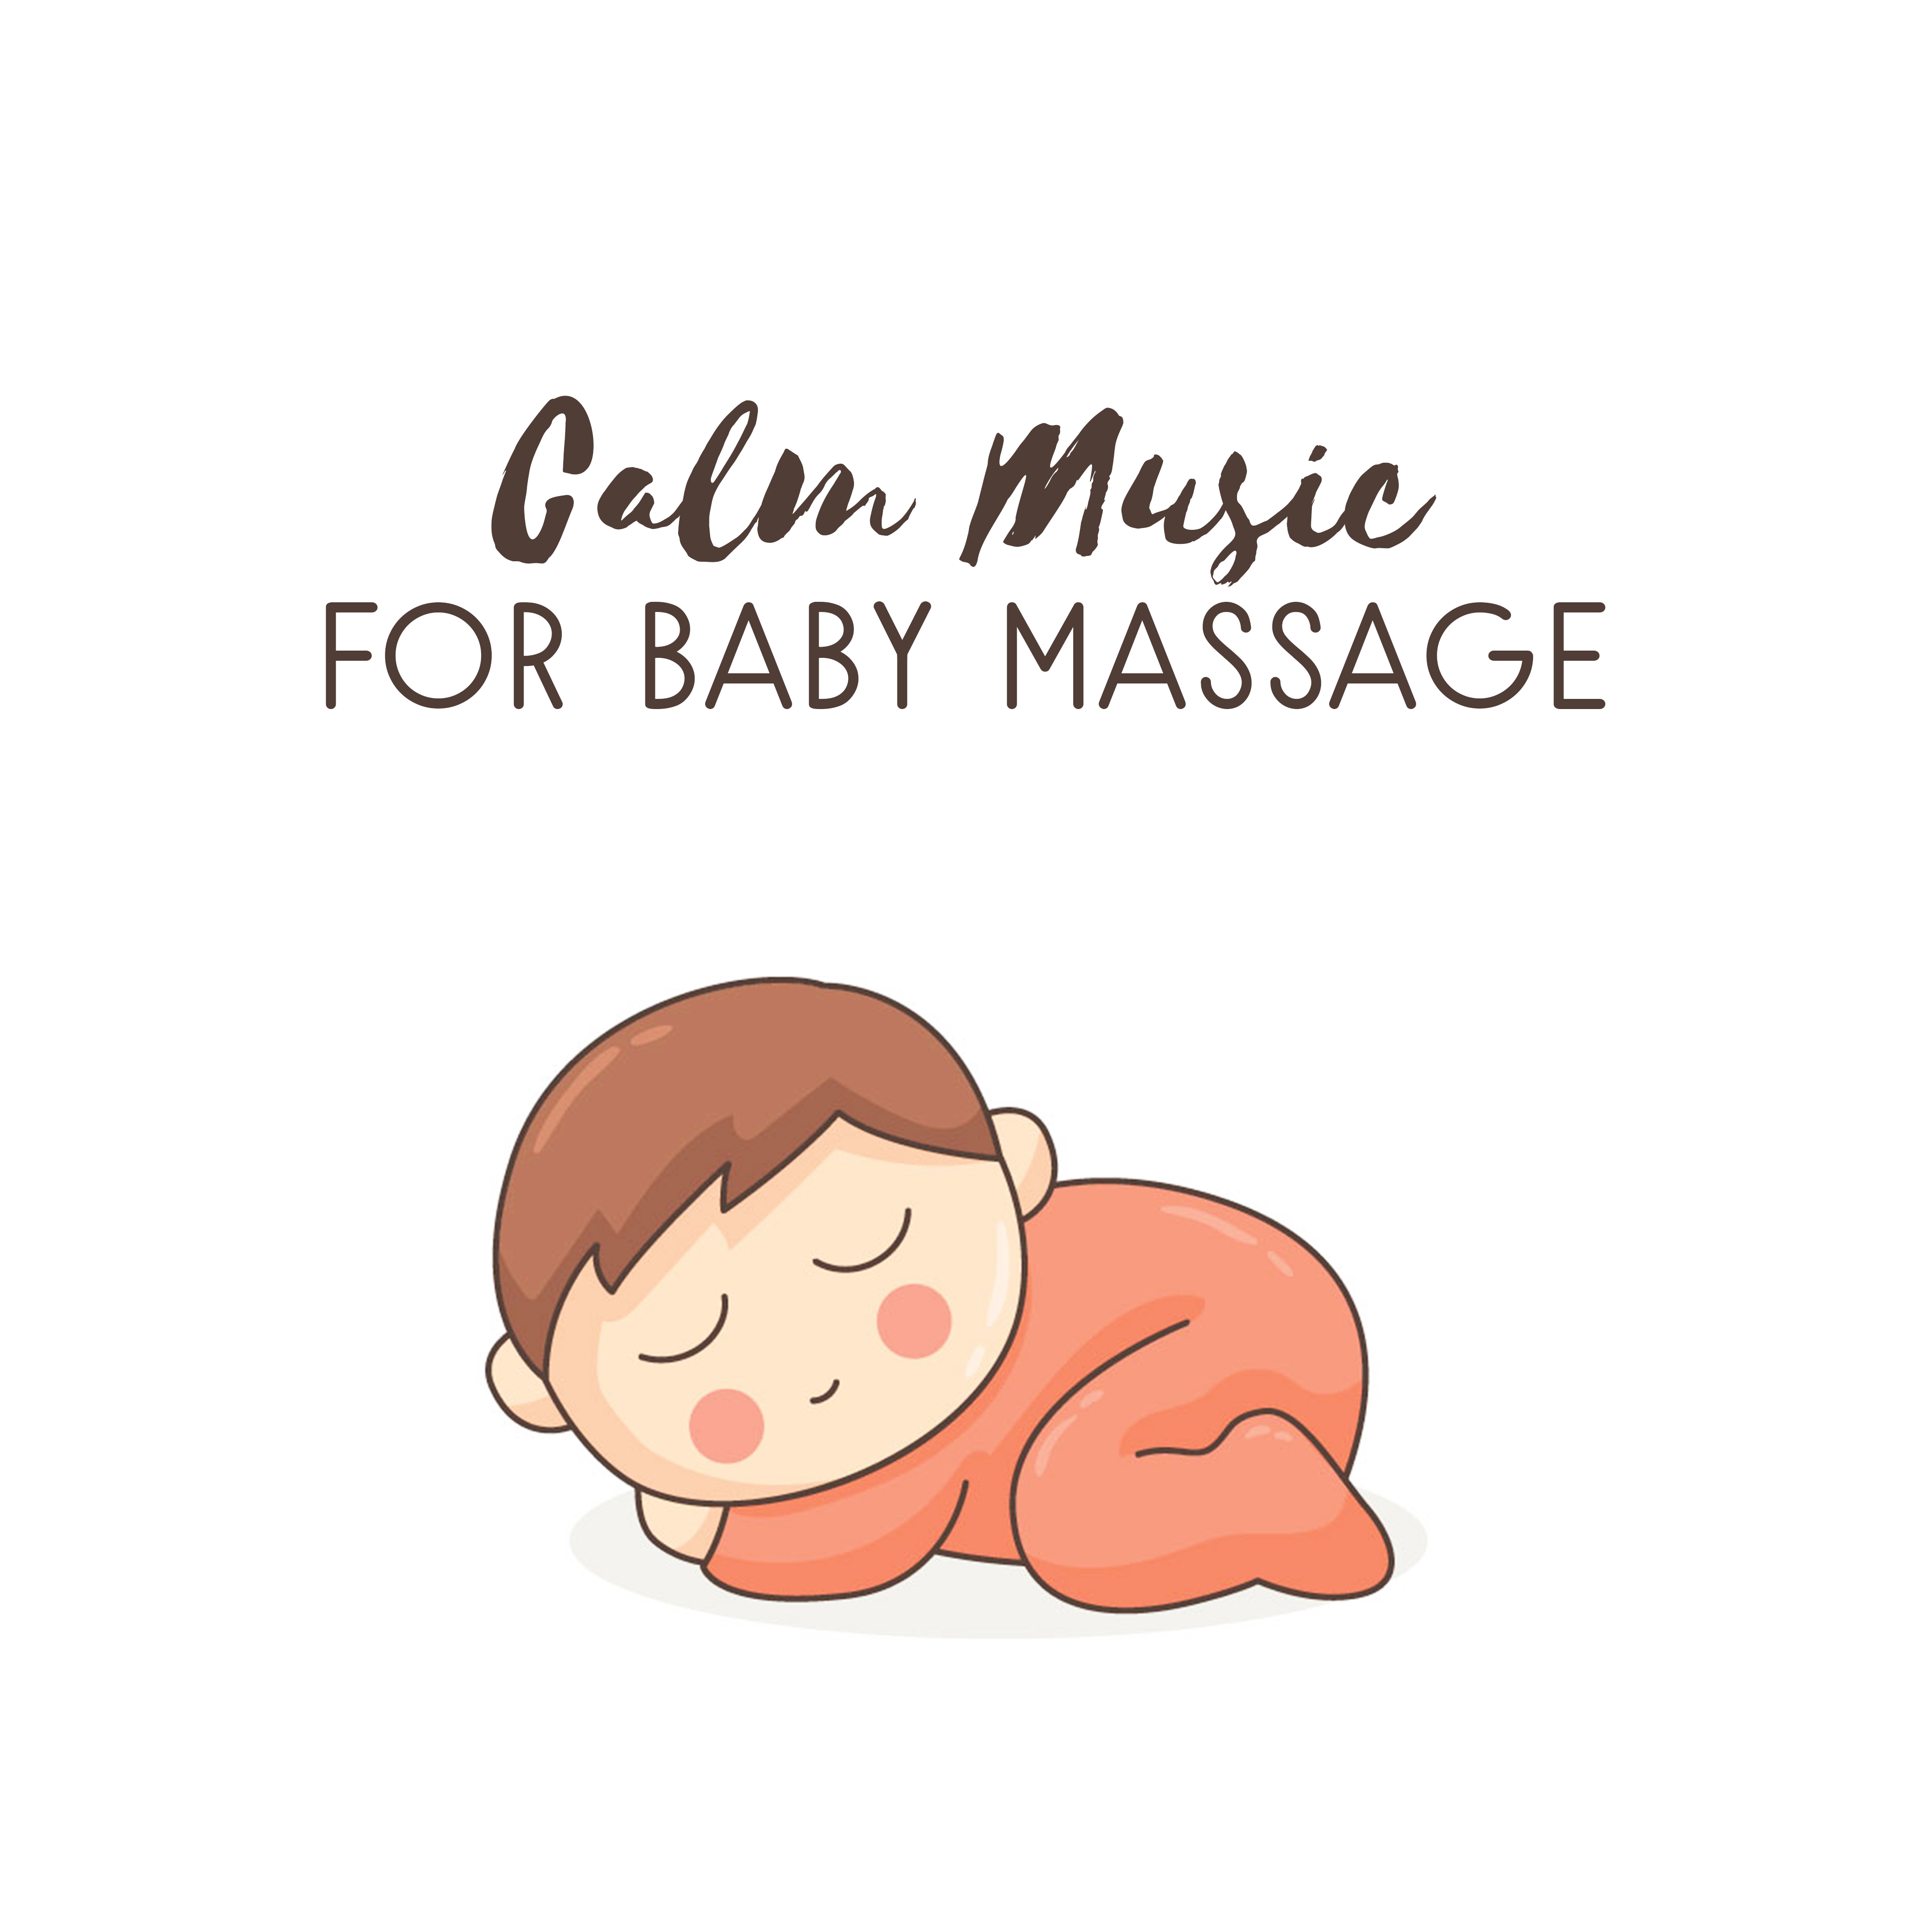 Calm Music for Baby Massage